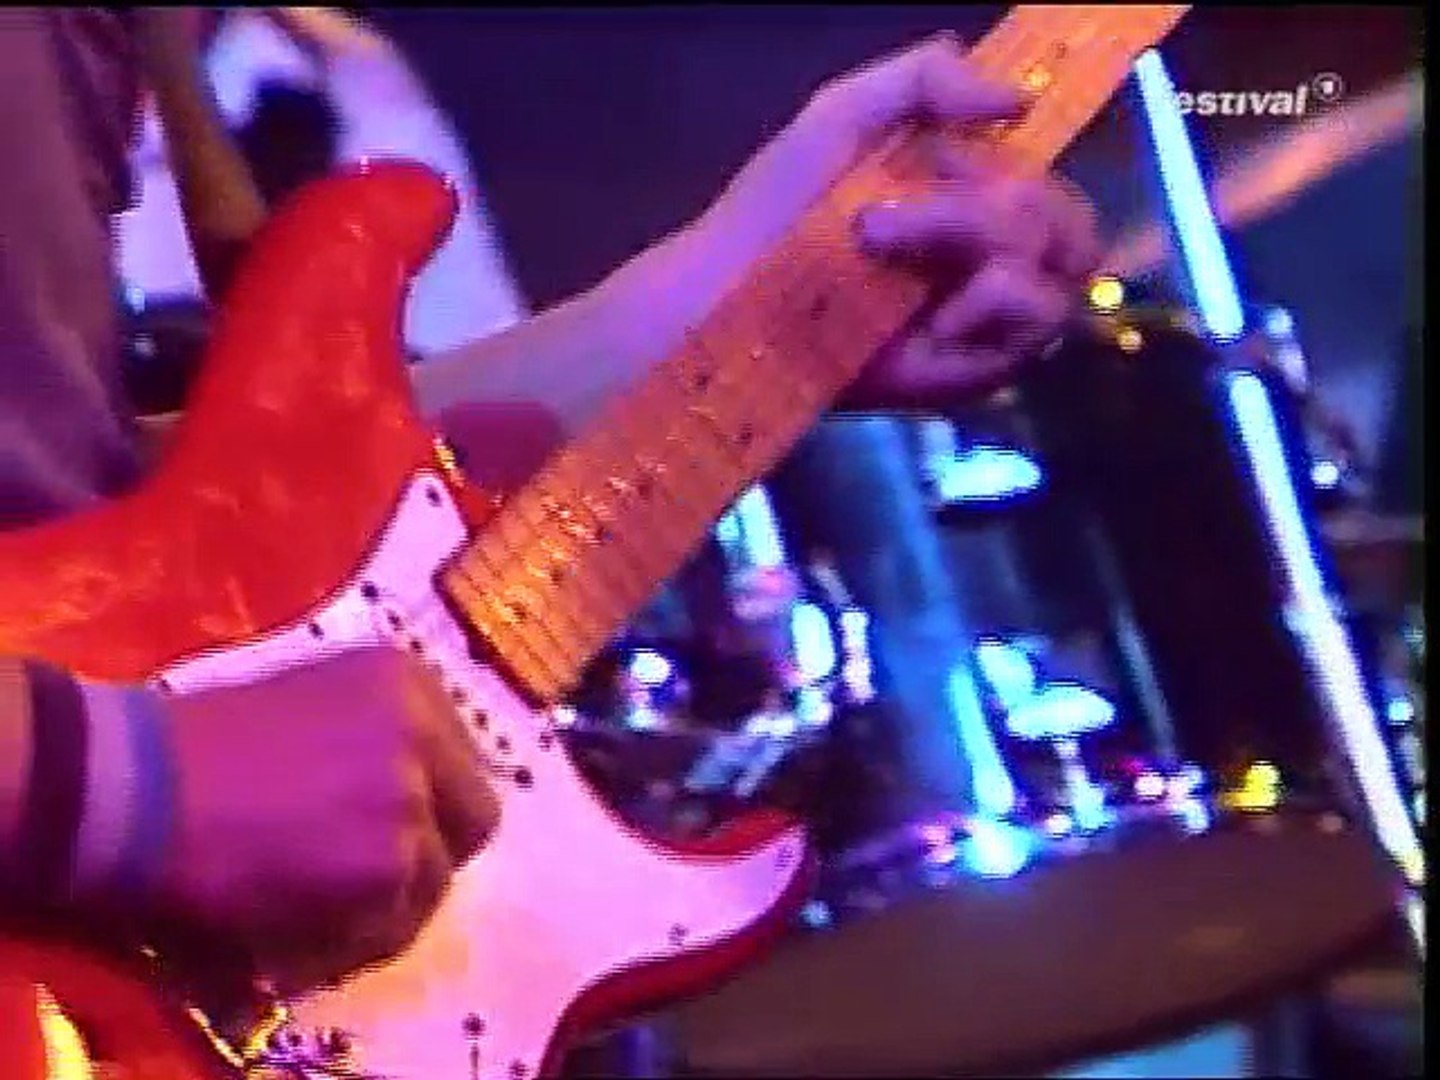 Dire Straits - 14 - Where Do You Think You're Going - Live Rockpalast  Cologne 16.02.1979 - Video Dailymotion